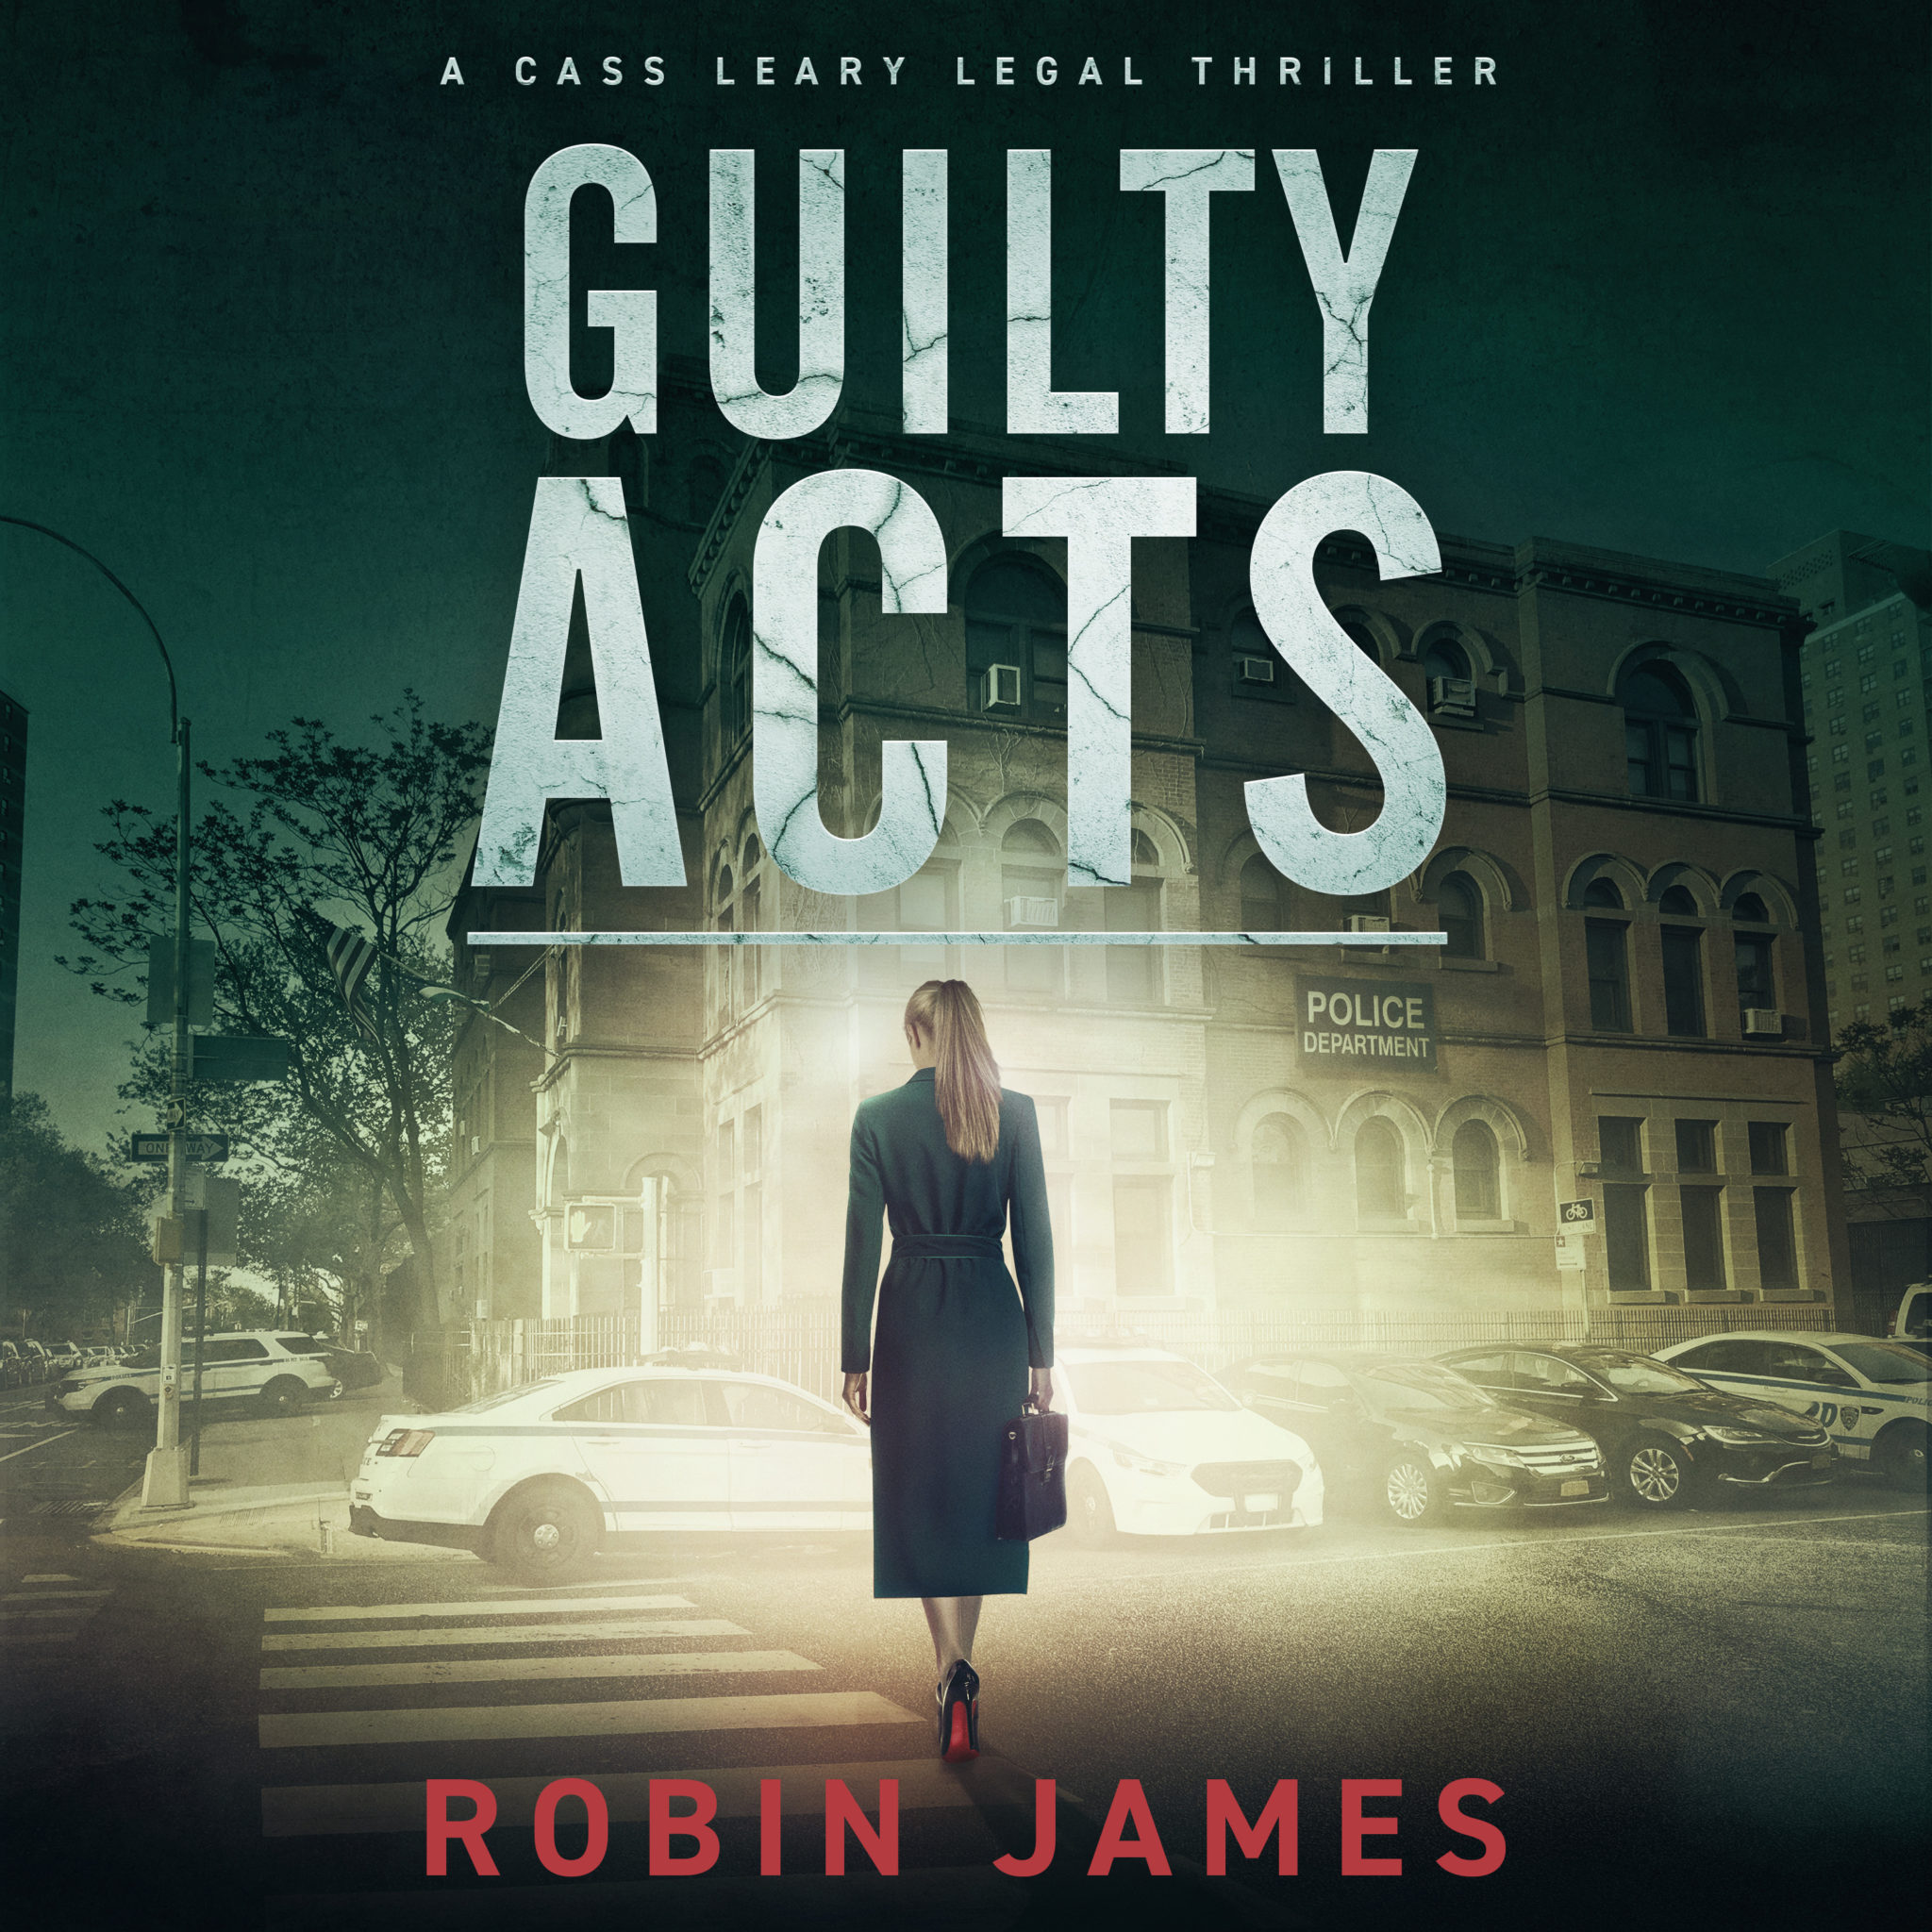 Audiobook Guilty Acts Robin James